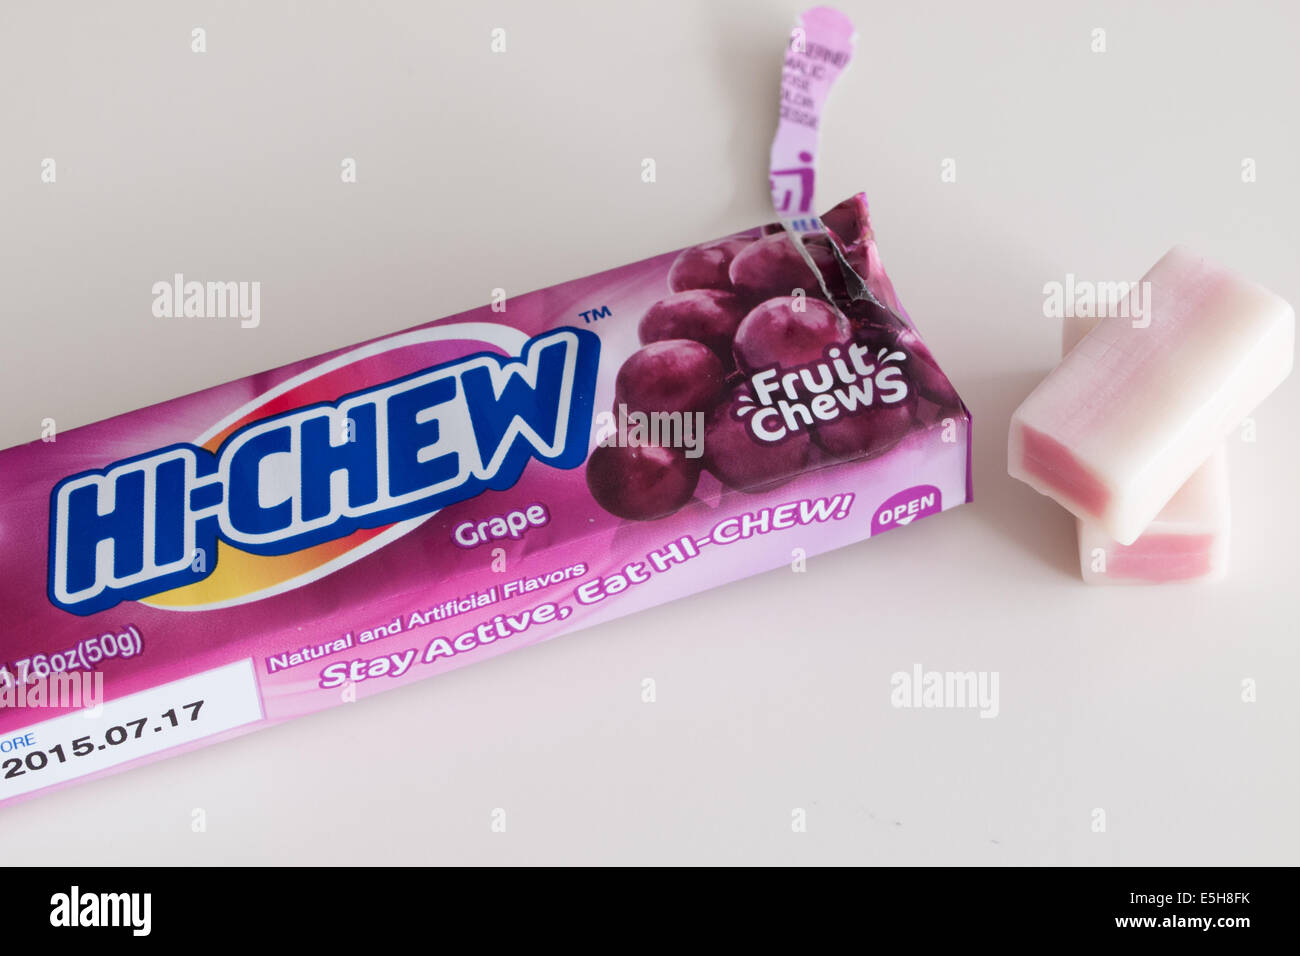 A stick of grape Hi-Chew chewy Japanese candy, manufactured by Morinaga & Company. Stock Photo